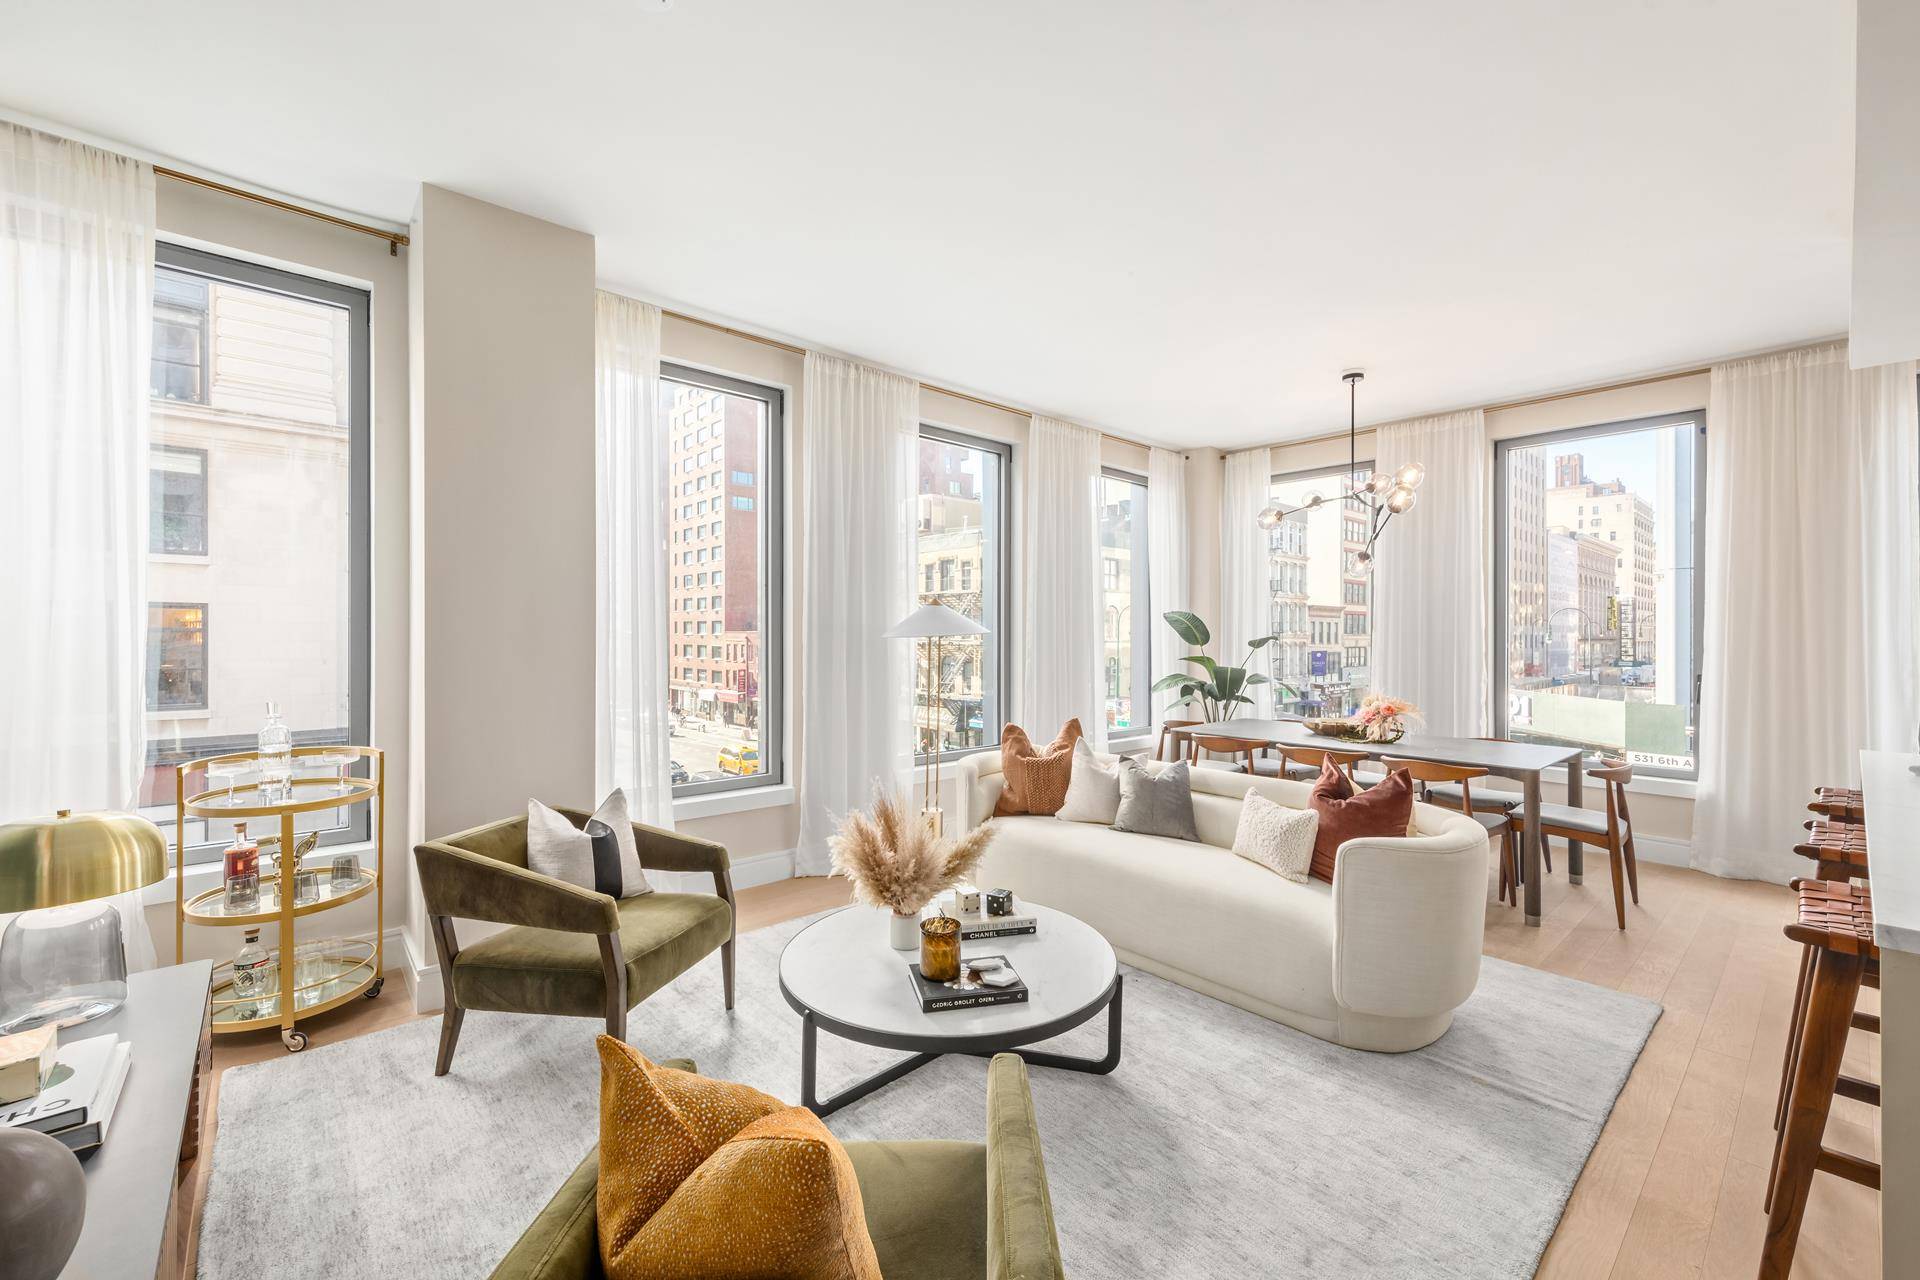 CLOSINGS HAVE COMMENCED. Now offering private showings of our onsite model residences located at 540 Sixth Avenue by appointment only.